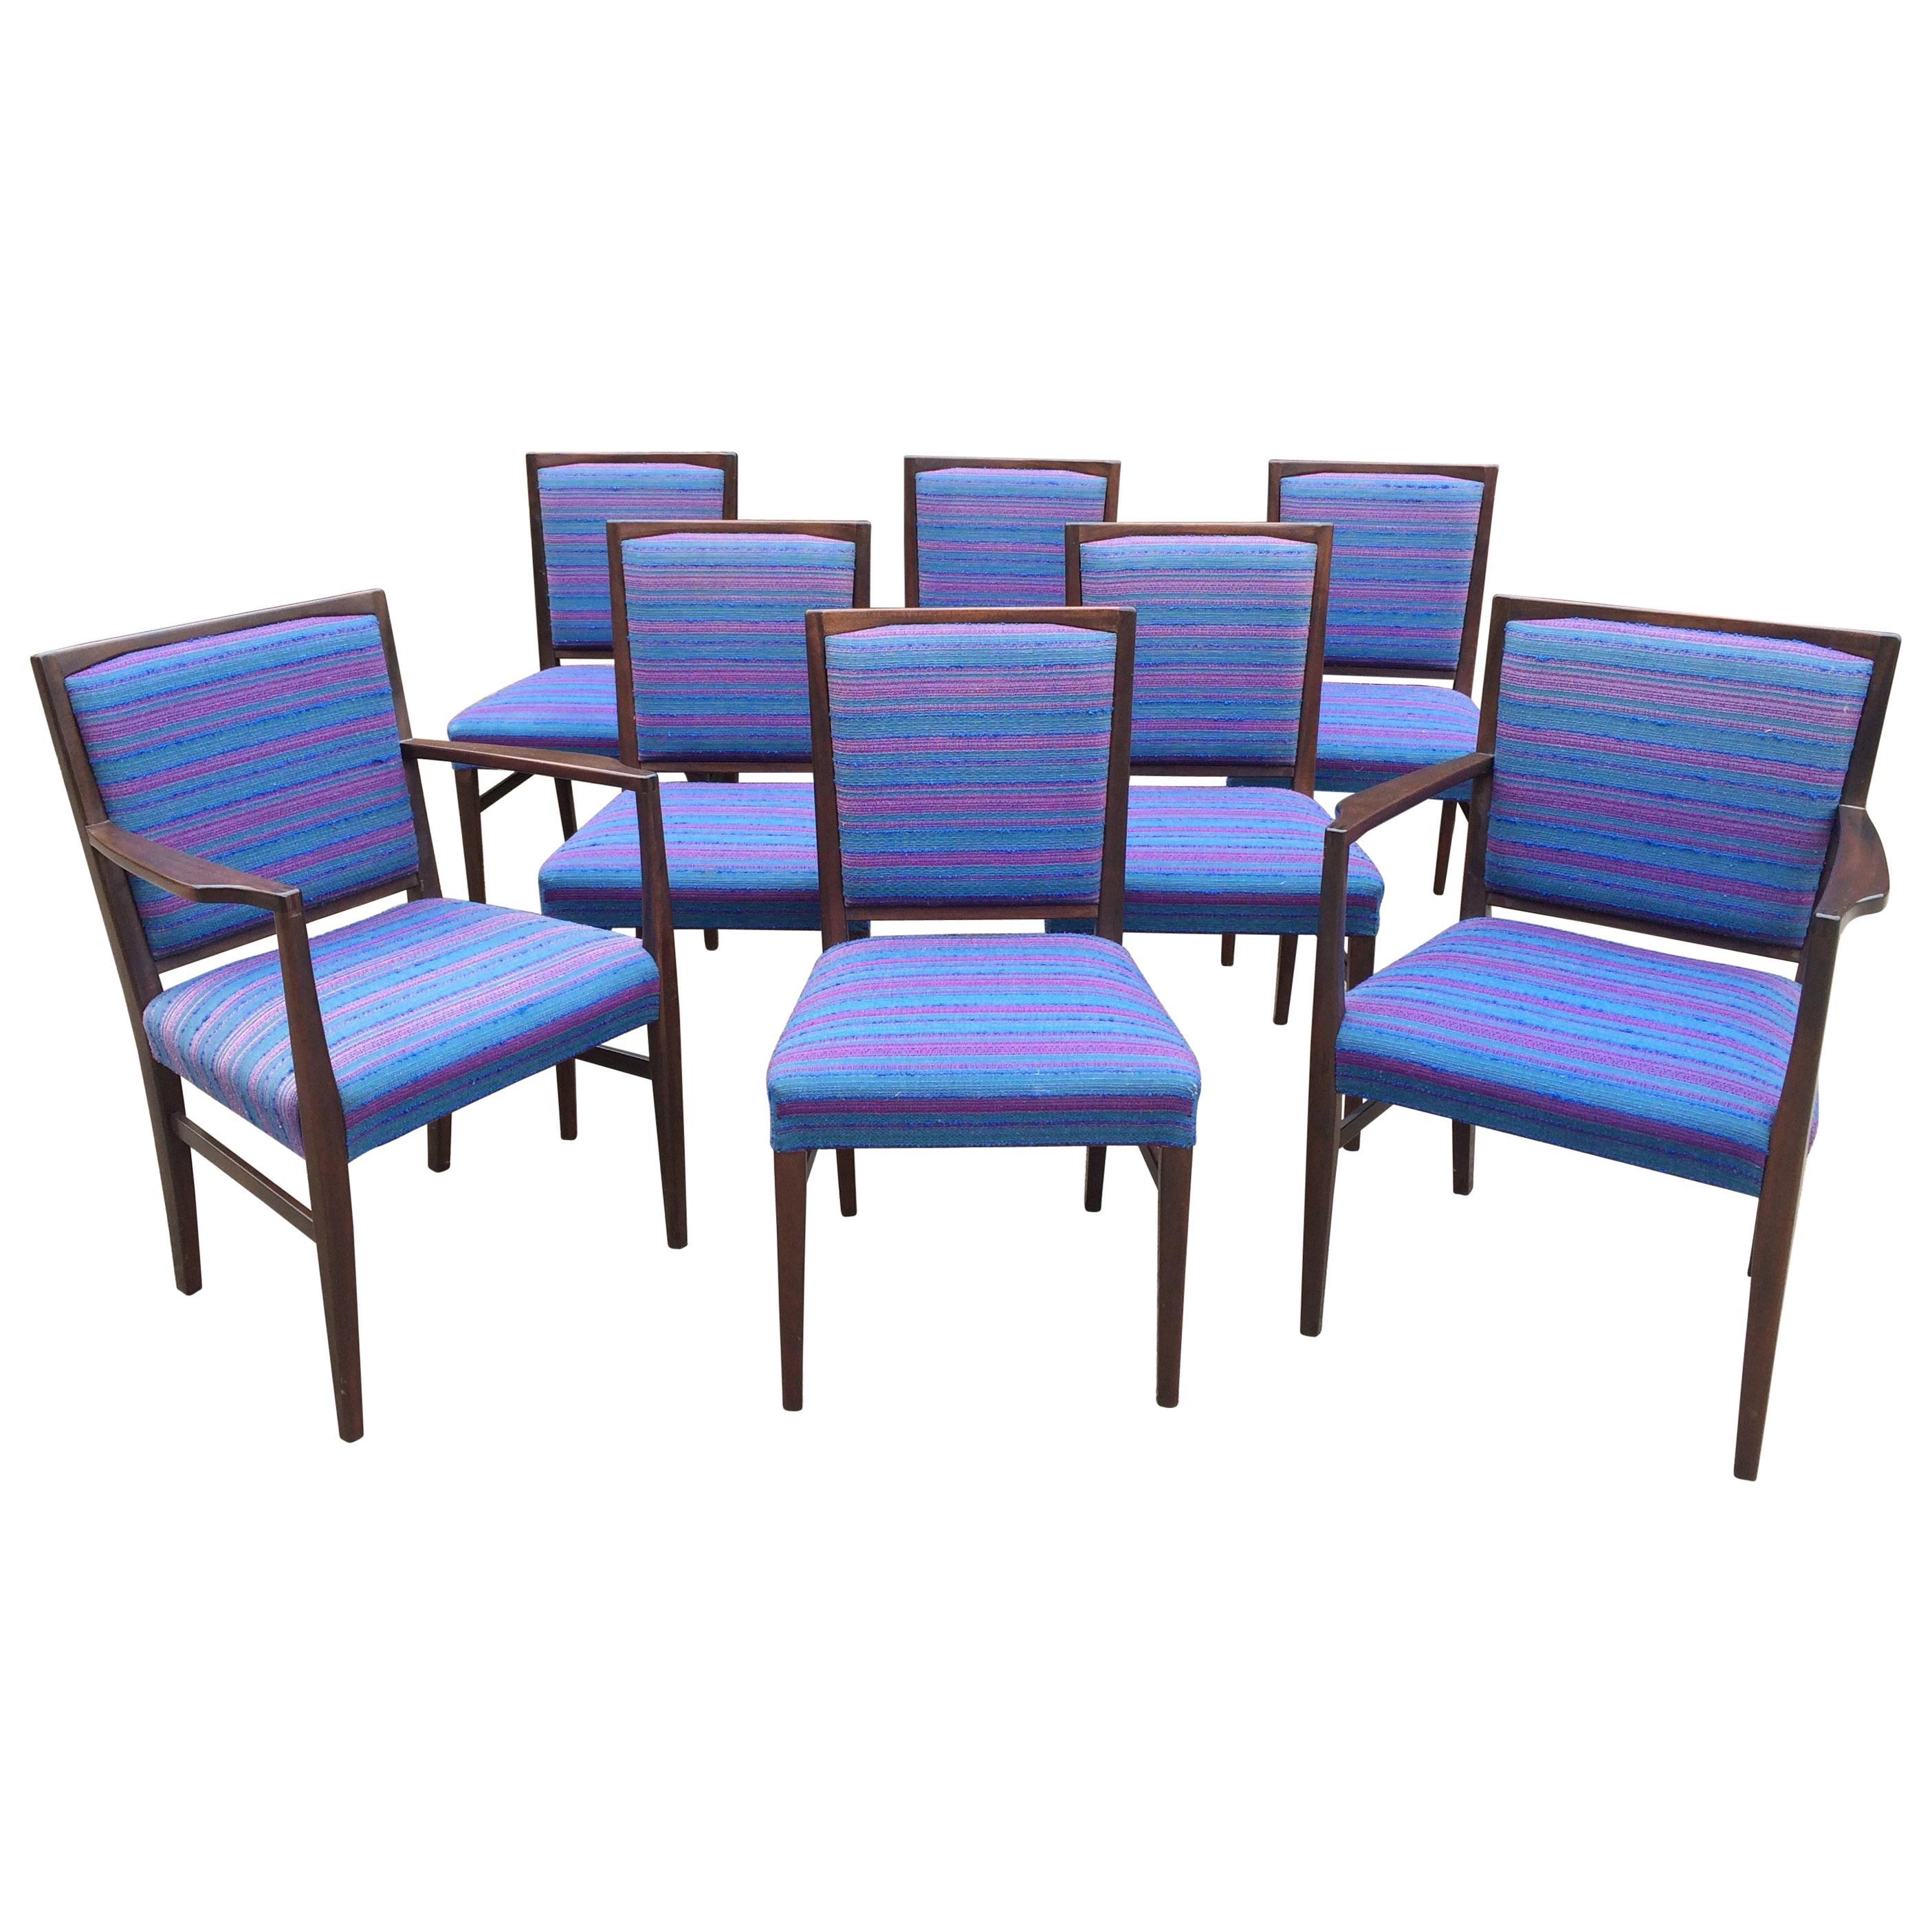 Gordon Russell Rosewood Dining Chairs Set of 8 Martin Hall Marwood Range, 1970s